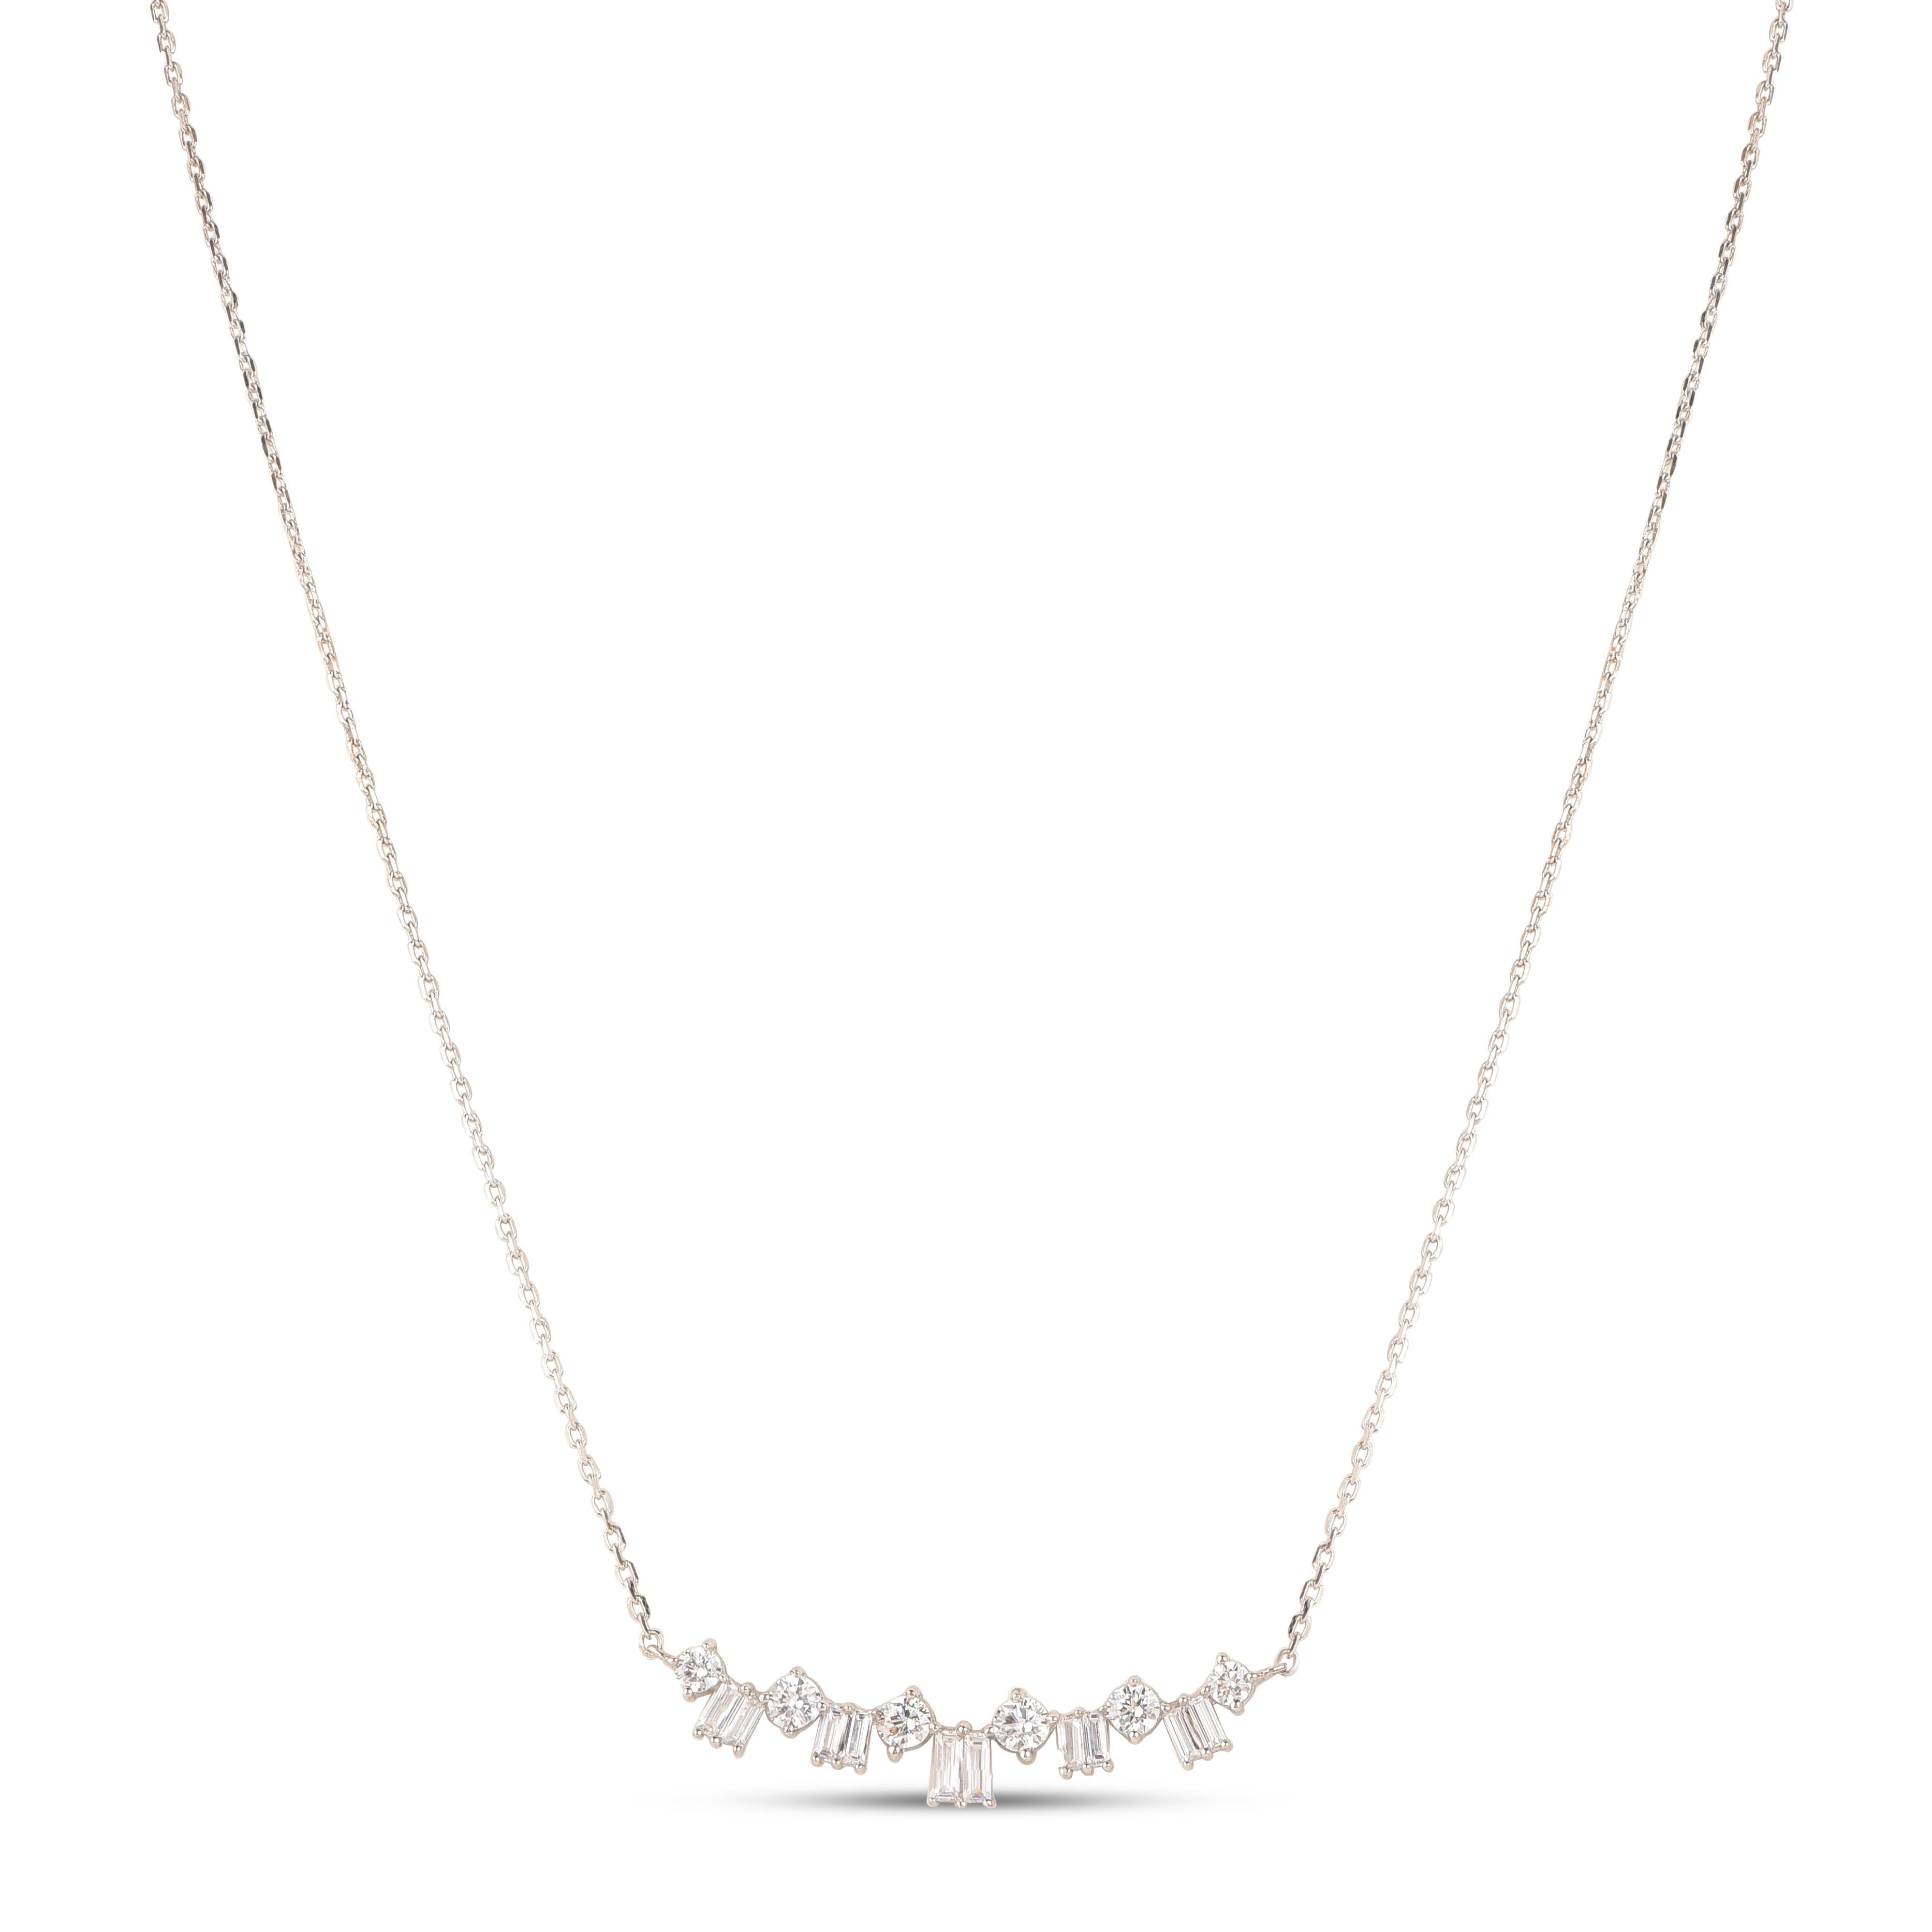 This pendant necklace is studded elegantly with 6 brilliant and 10 baguette cut diamonds set in prong setting and handcrafted in 18-Karat White Gold. The diamonds are graded H-I Color, I2 Clarity. This cable chain necklace is a great match for your